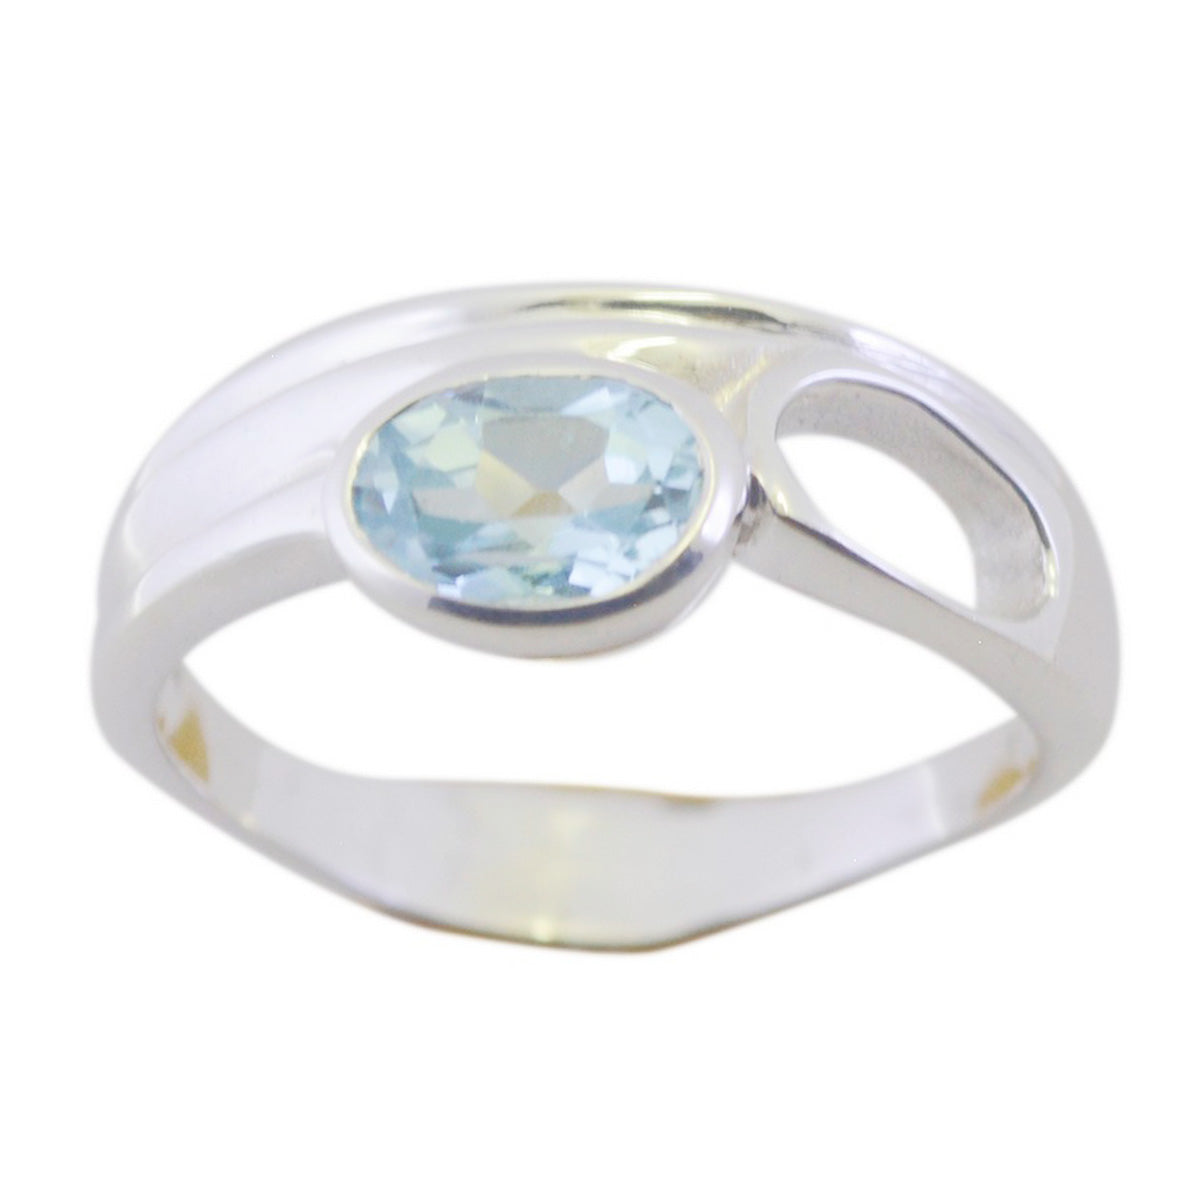 Bewitching Stone Blue Topaz 925 Sterling Silver Rings Jewelry Kpop